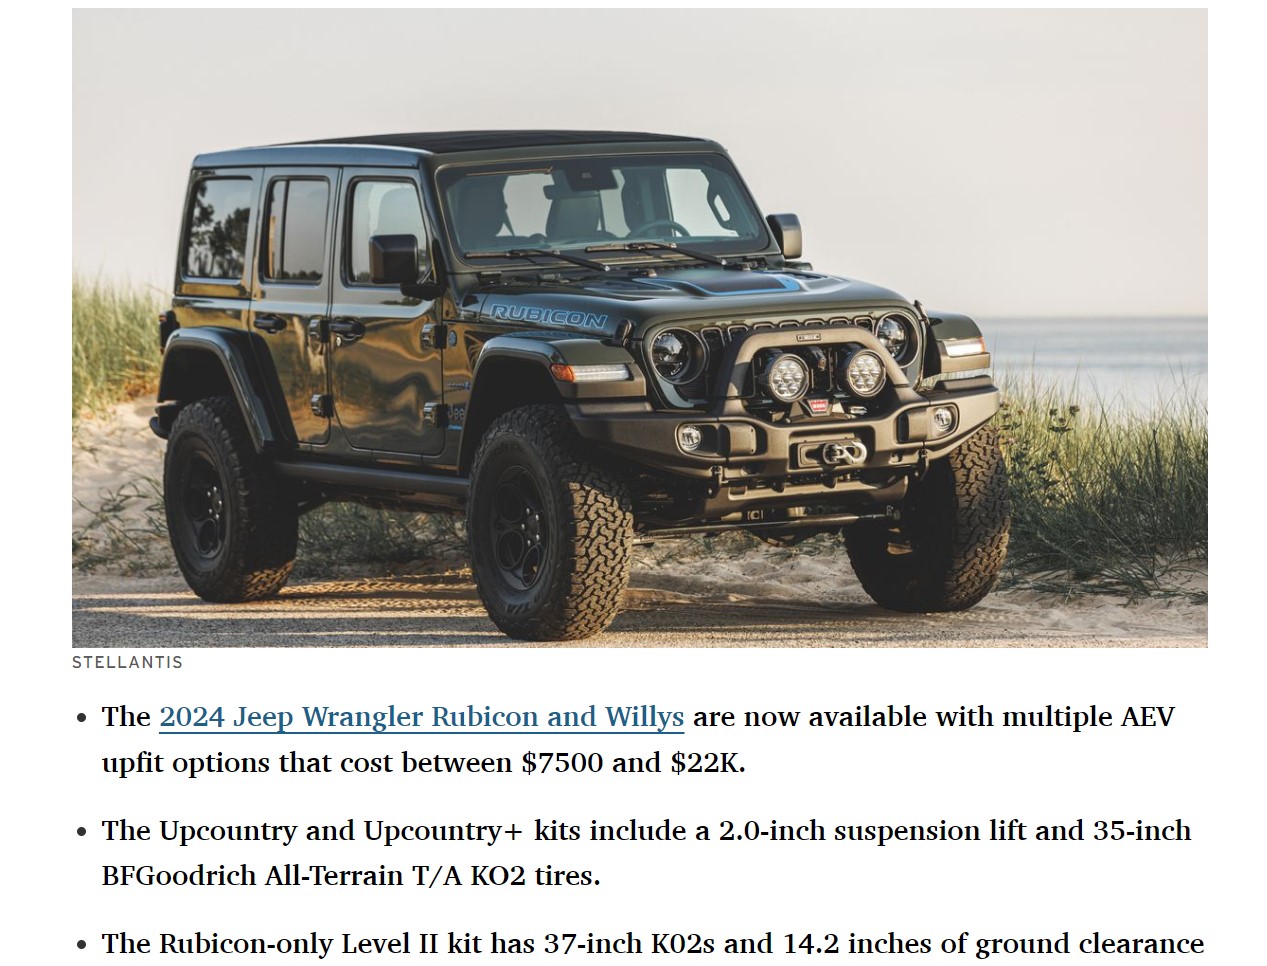 Ford Bronco Wrangler Rubicon-only Level II kit by AEV has 37-inch K02s and 14.2 inches of ground clearance [Car and Driver] RMSdUH2